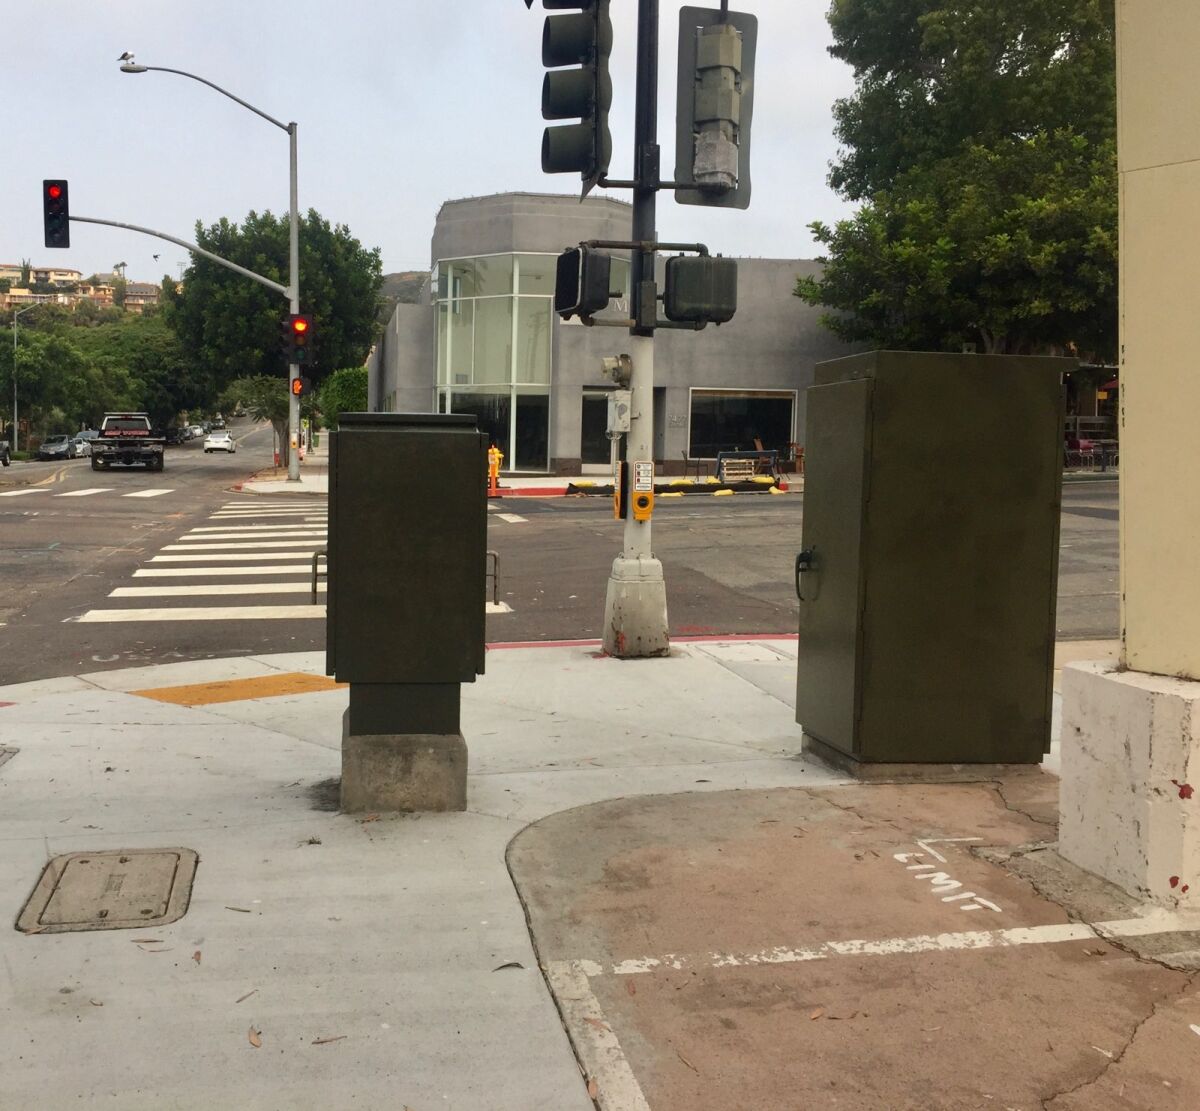 Utility boxes at Pearl Street and Girard Avenue after a paint job by Enhance La Jolla.